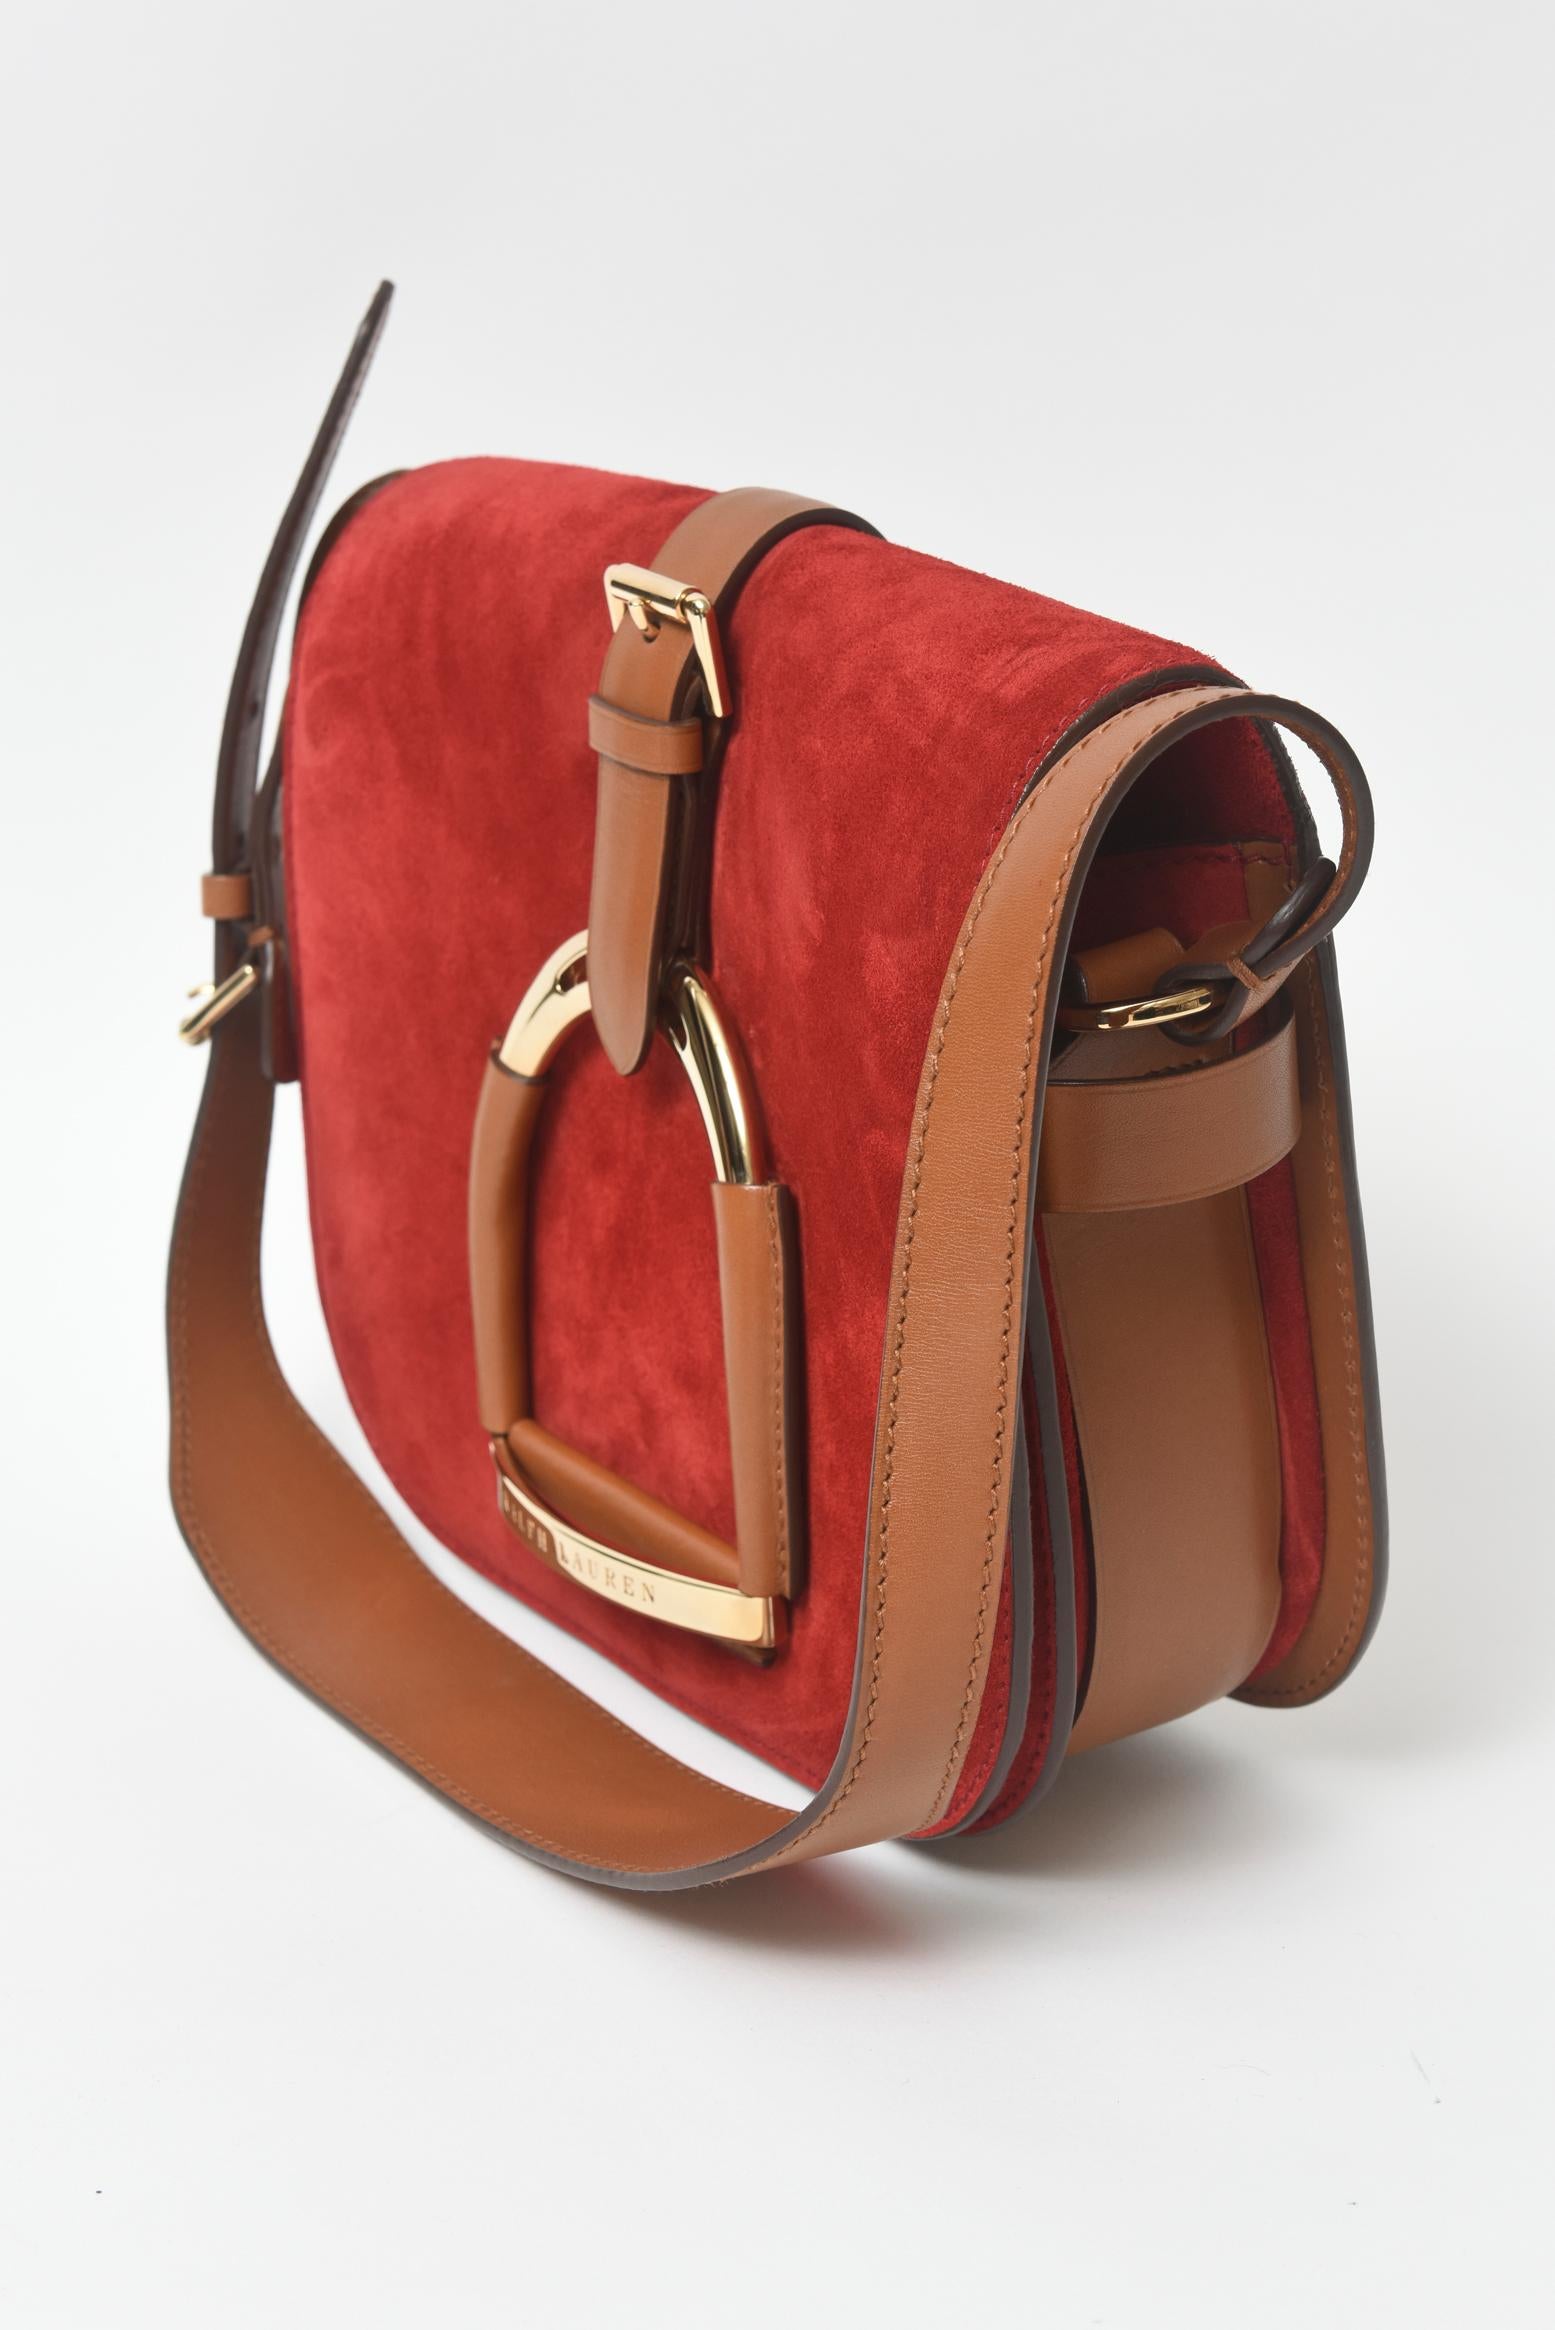 Hard to Find Red Suede Stirrup Bag from
Ralph Lauren's
The Equestrian Collection Shoulder Bag

This bag was seen on Ralph Lauren's runway.  The purse is a combination of rich red suede and luxurious brown calfskin.  The most notable thing about this